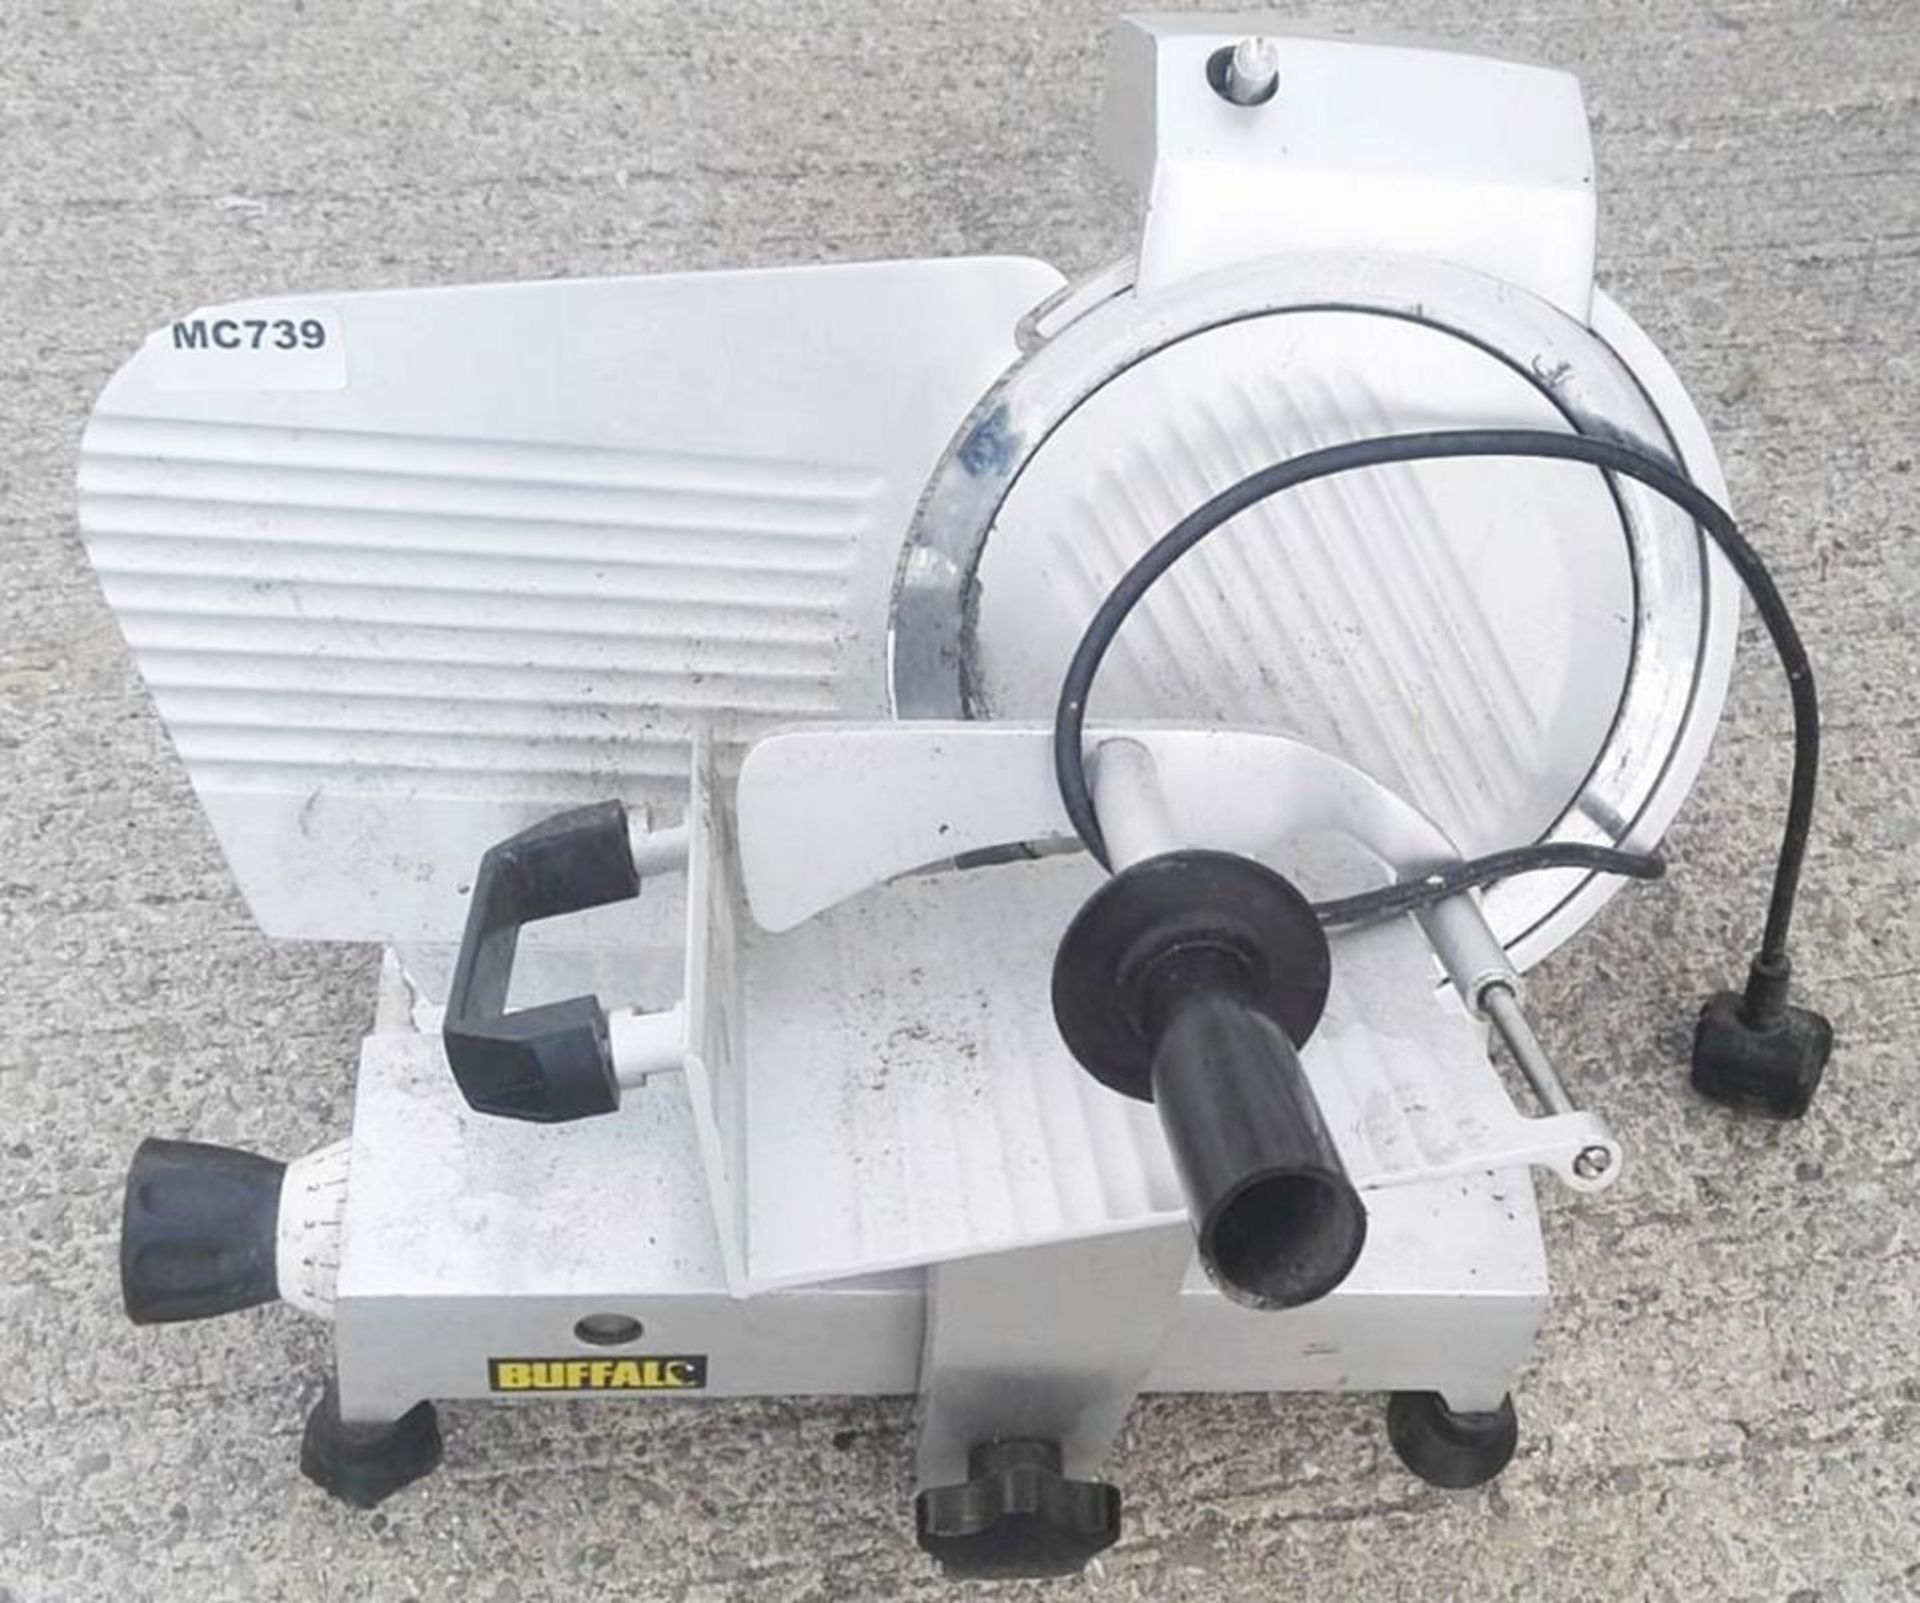 1 x BUFFALO Meat Slicer - Pre-owned, Taken From An Asian Fusion Restaurant - Ref: MC739 - CL540 - WH